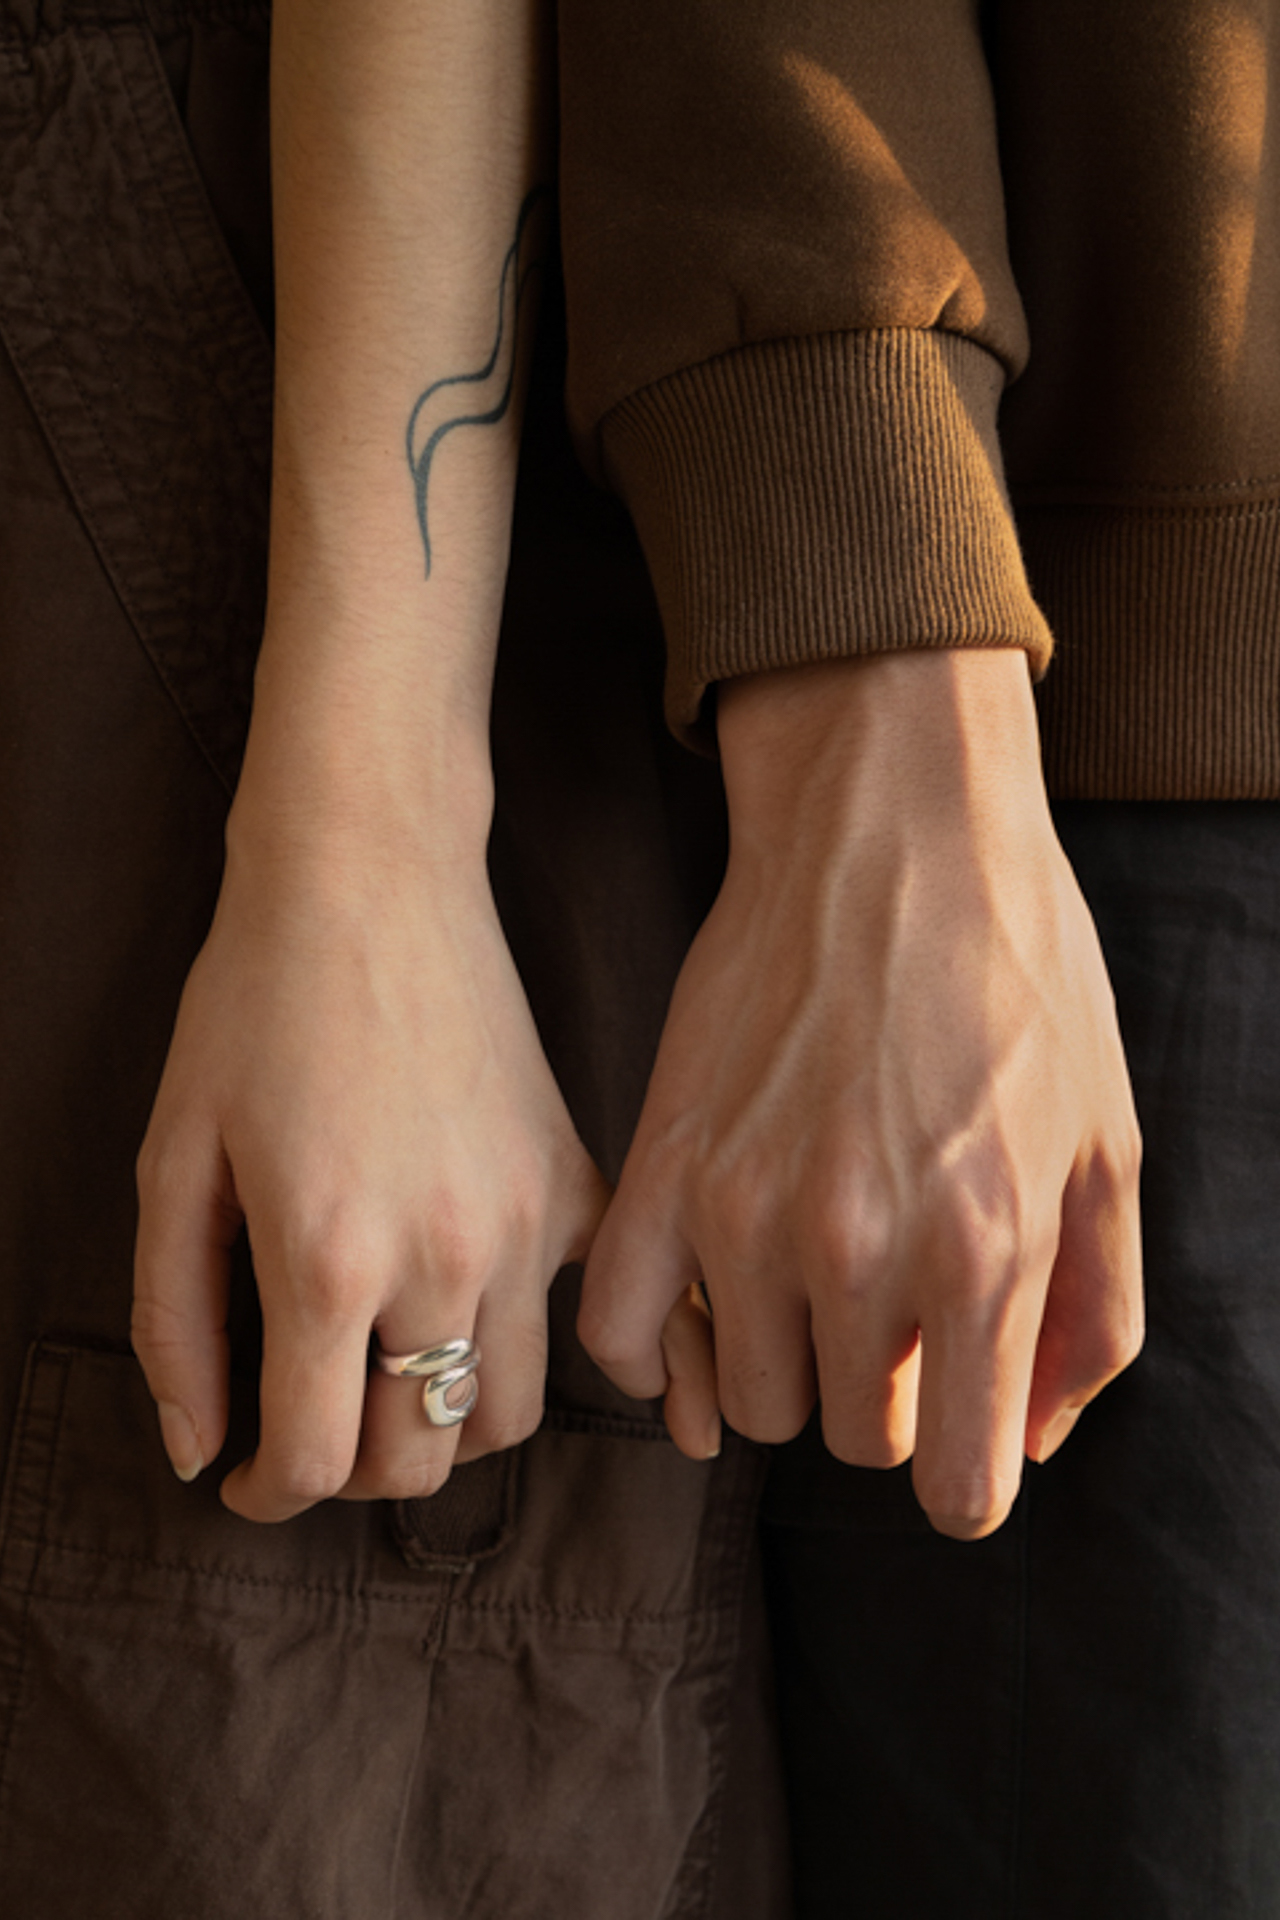 this photograph is a close up detail shot of two people's hands linked by their pinkies. The hand to the left is wearing a silver ring on their middle finger. The hands are at waist level and the overall colour scheme consists of warm browns and greys.